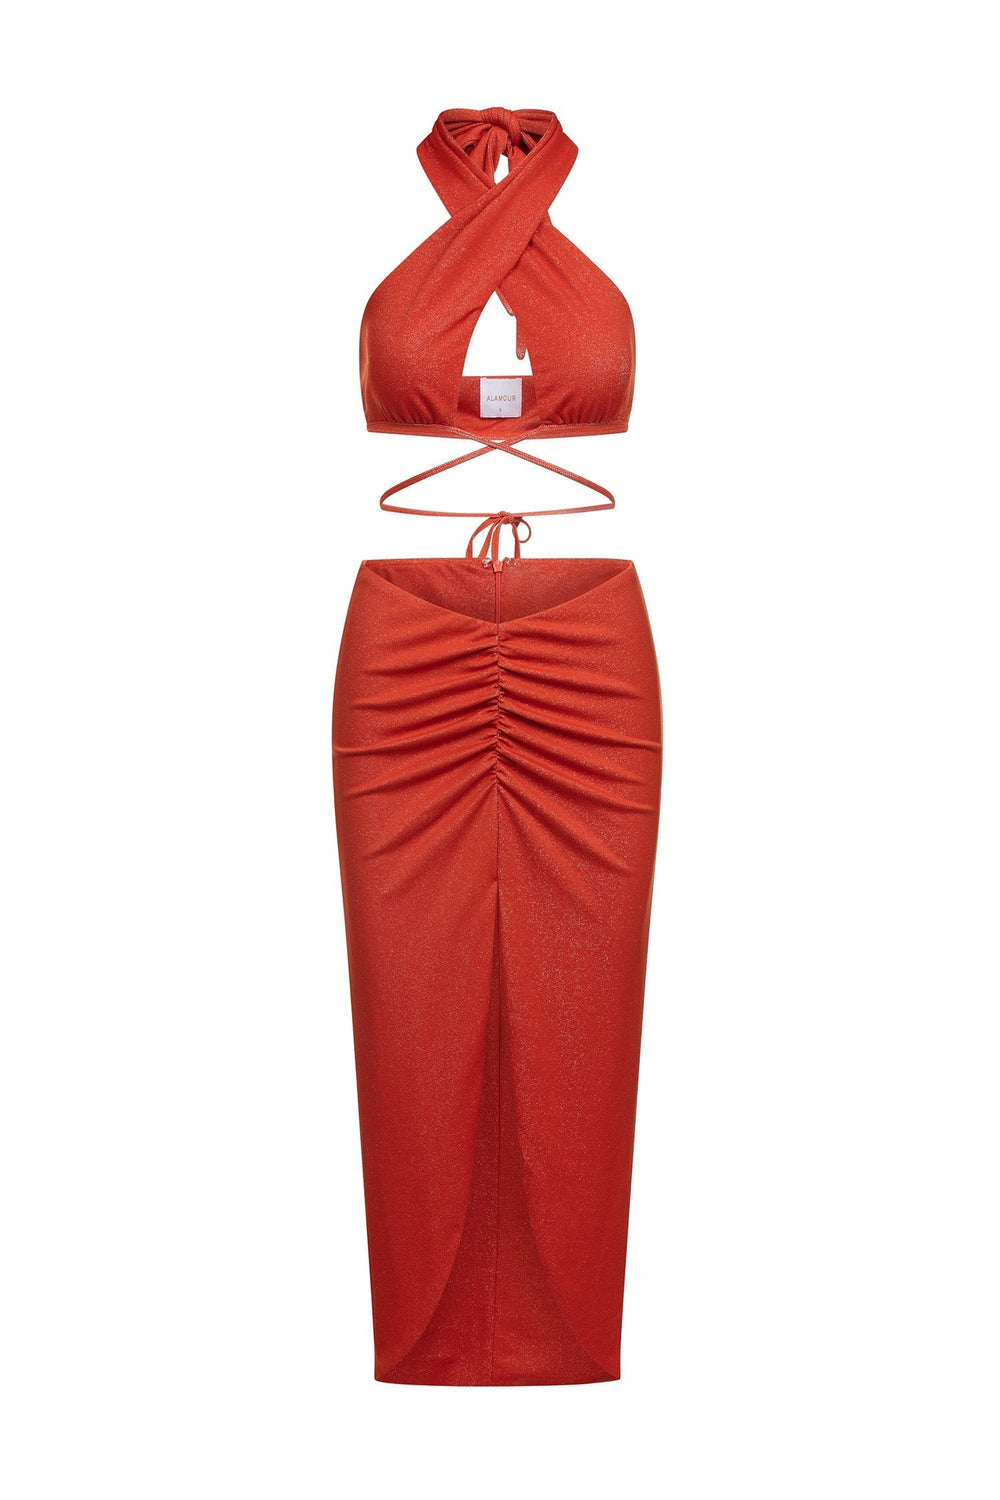 Madalena Set - Shimmering Orange Two Piece with Slit & Cut Out Bodice